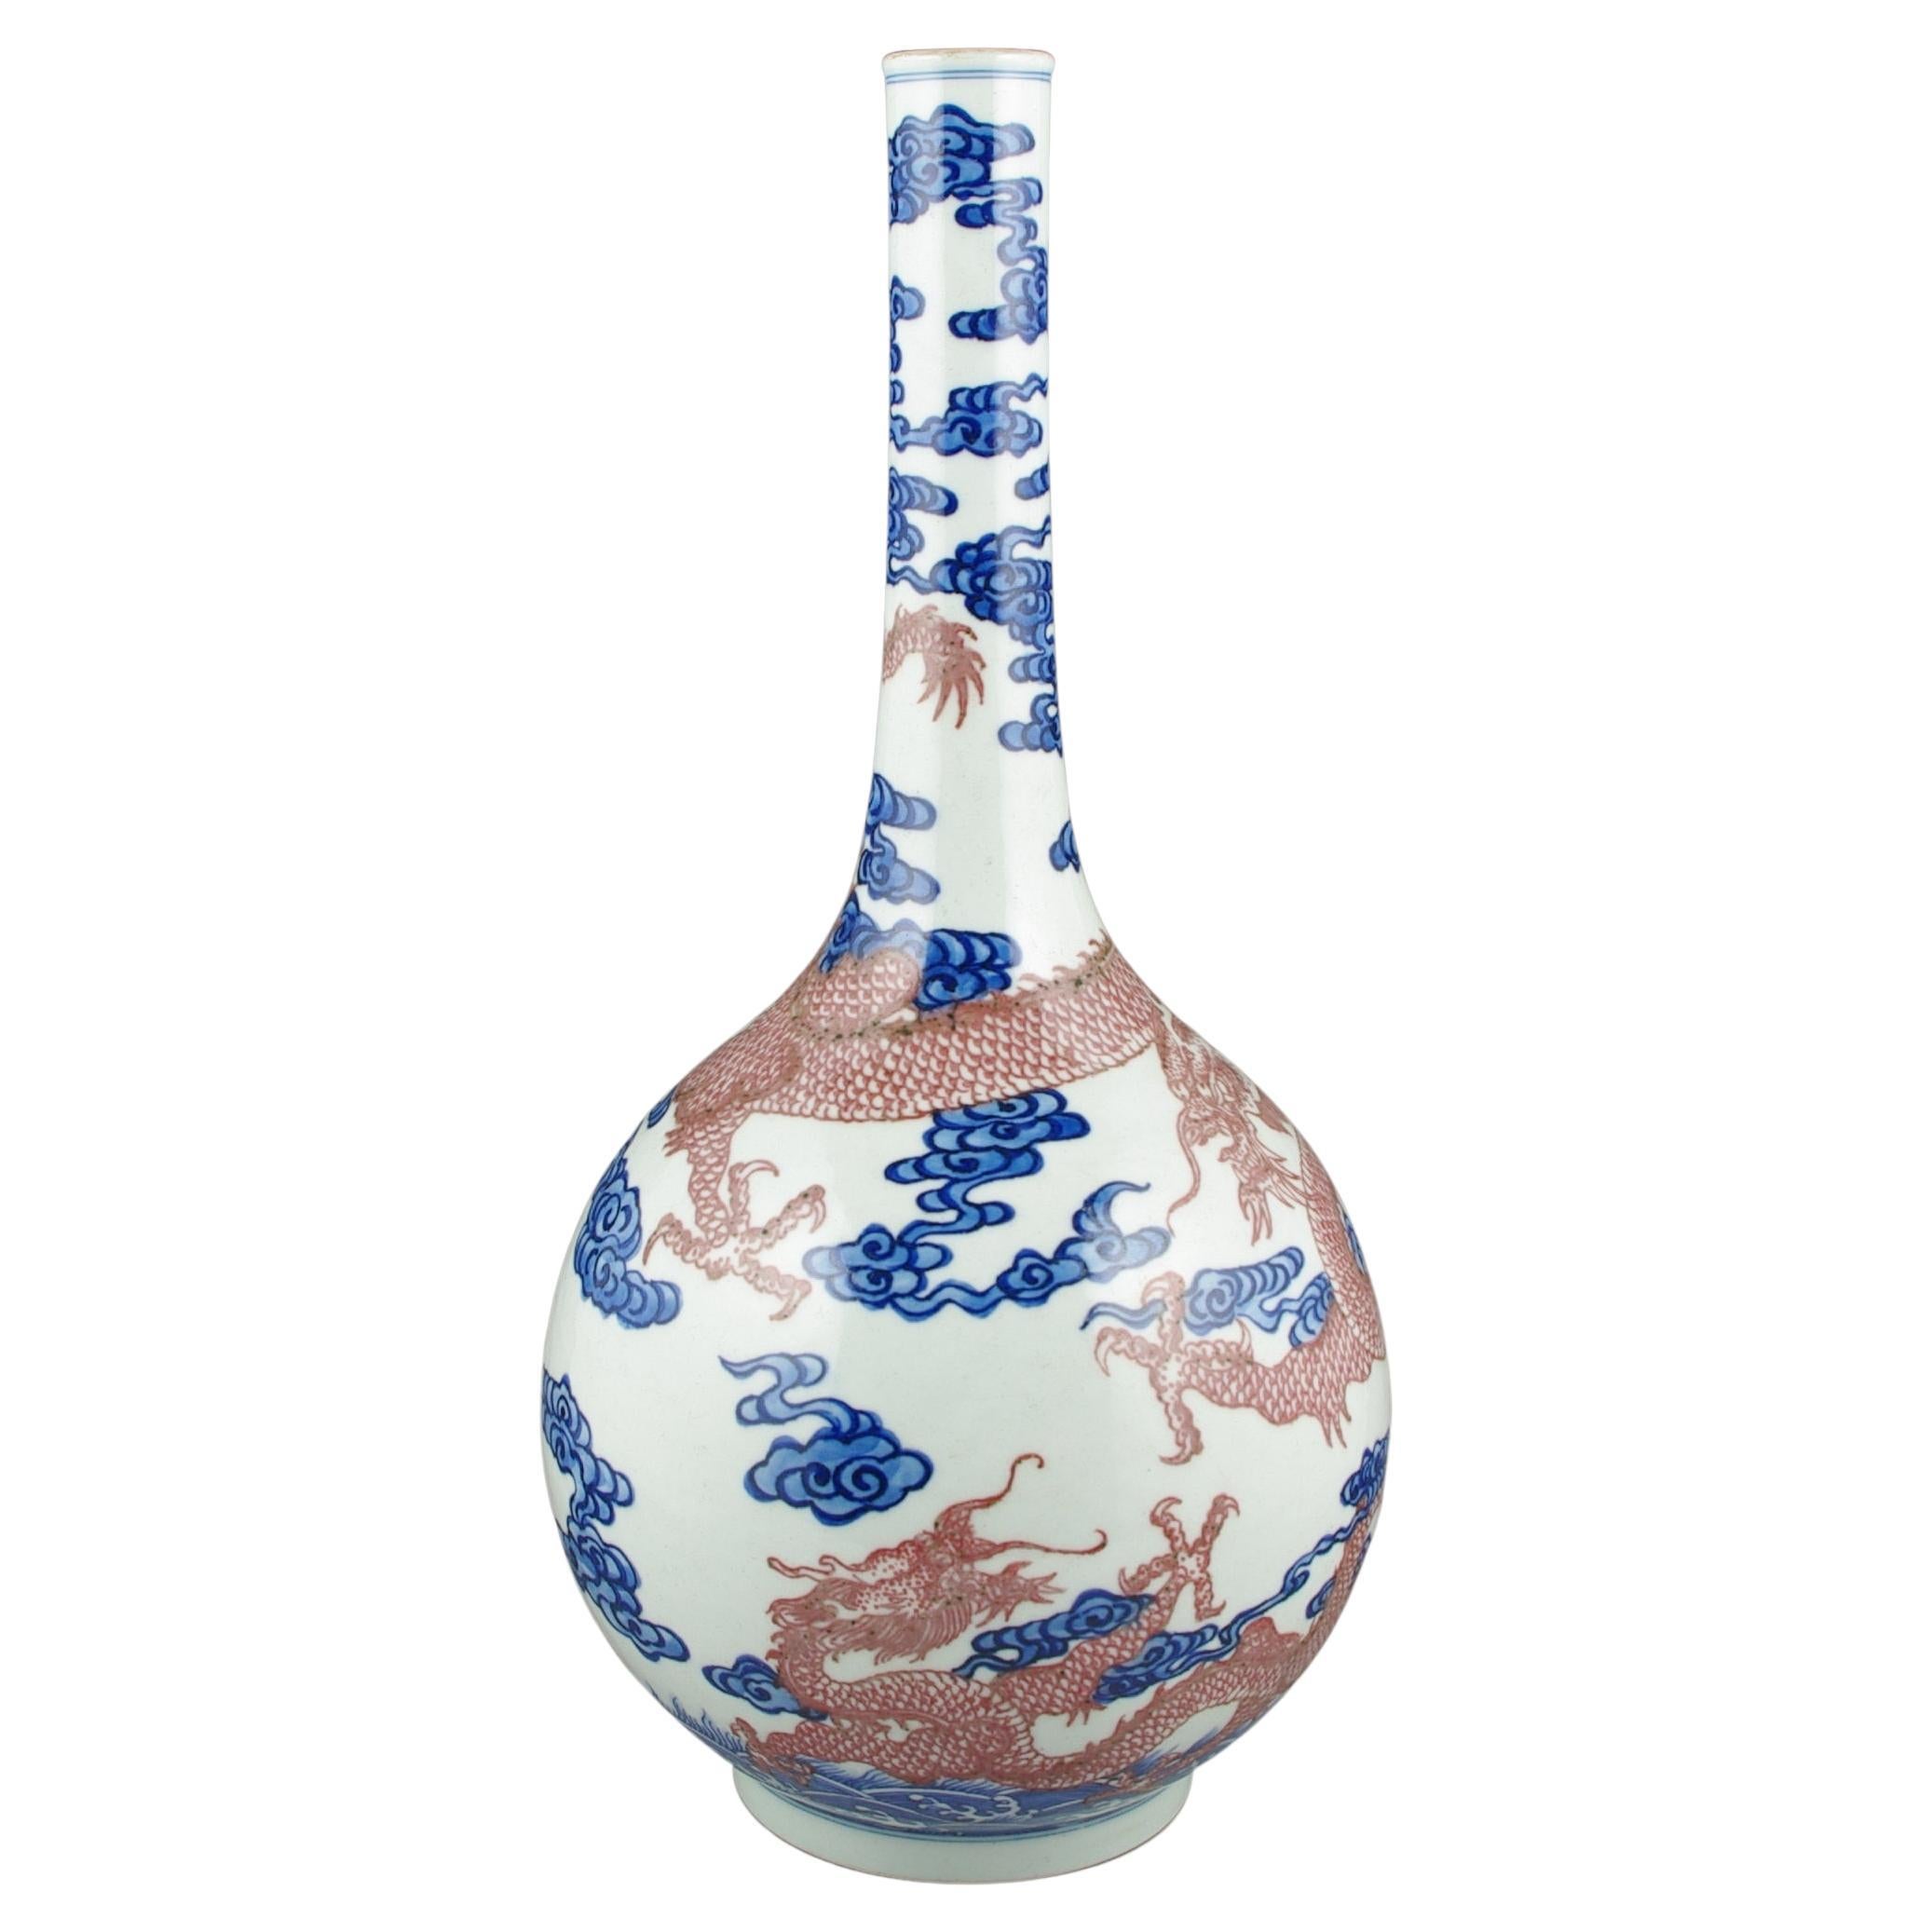 We are thrilled to present this exquisite Chinese porcelain long-neck bottle vase, a splendid representation of masterful craftsmanship and artistic tradition. The vase captivates with its intricate depiction of two scaly four-clawed dragons,